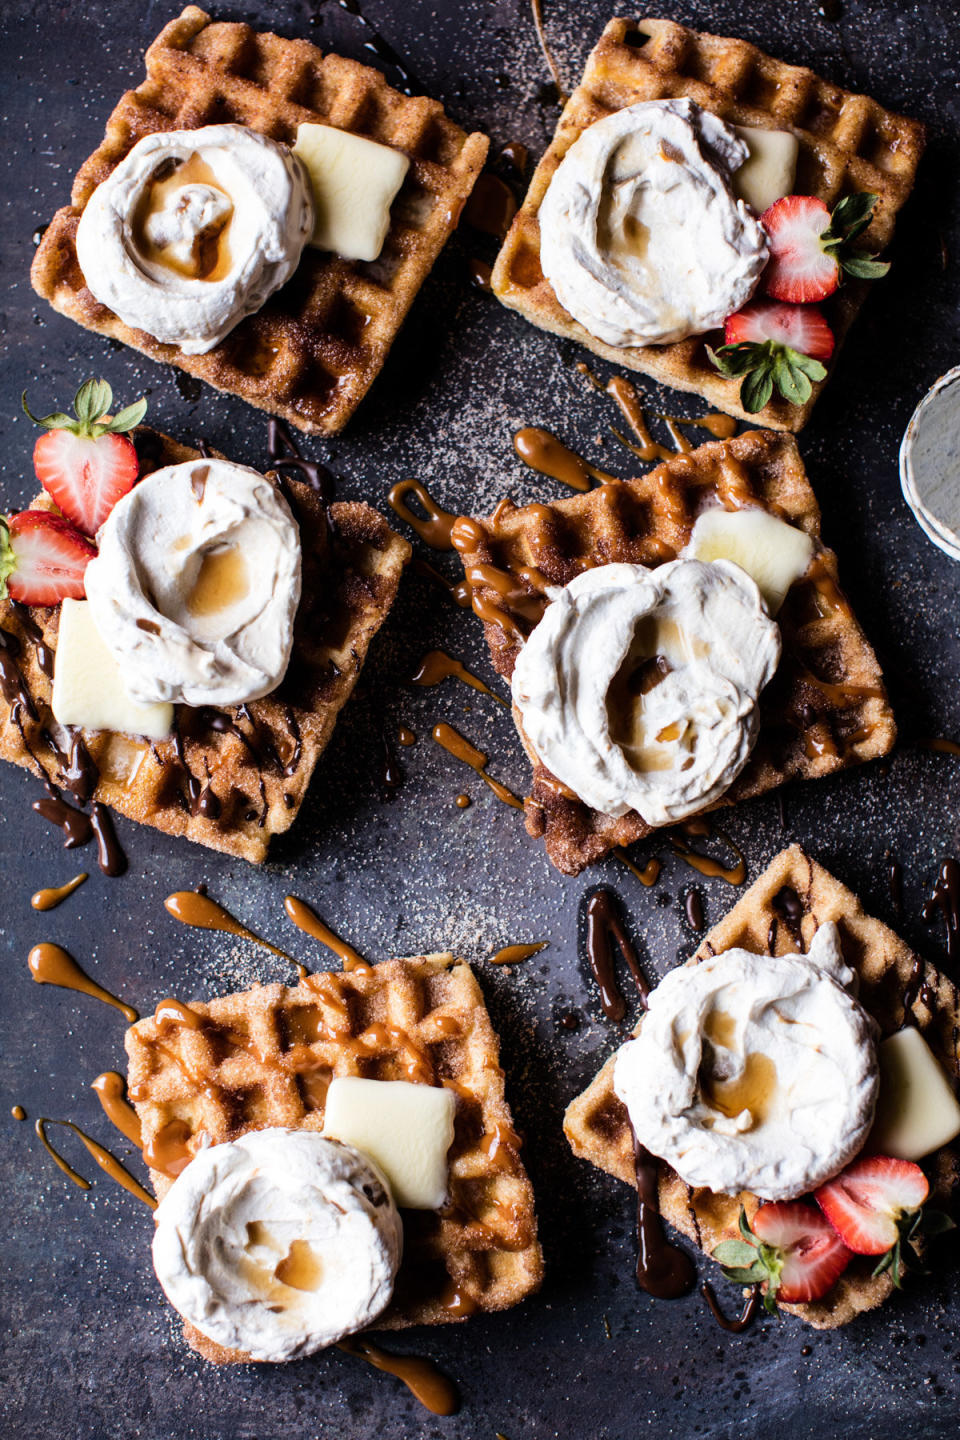 <strong>Get the <a href="http://www.halfbakedharvest.com/churro-waffles/" target="_blank">Churro Waffles recipe</a>&nbsp;from&nbsp;Half Baked Harvest</strong>